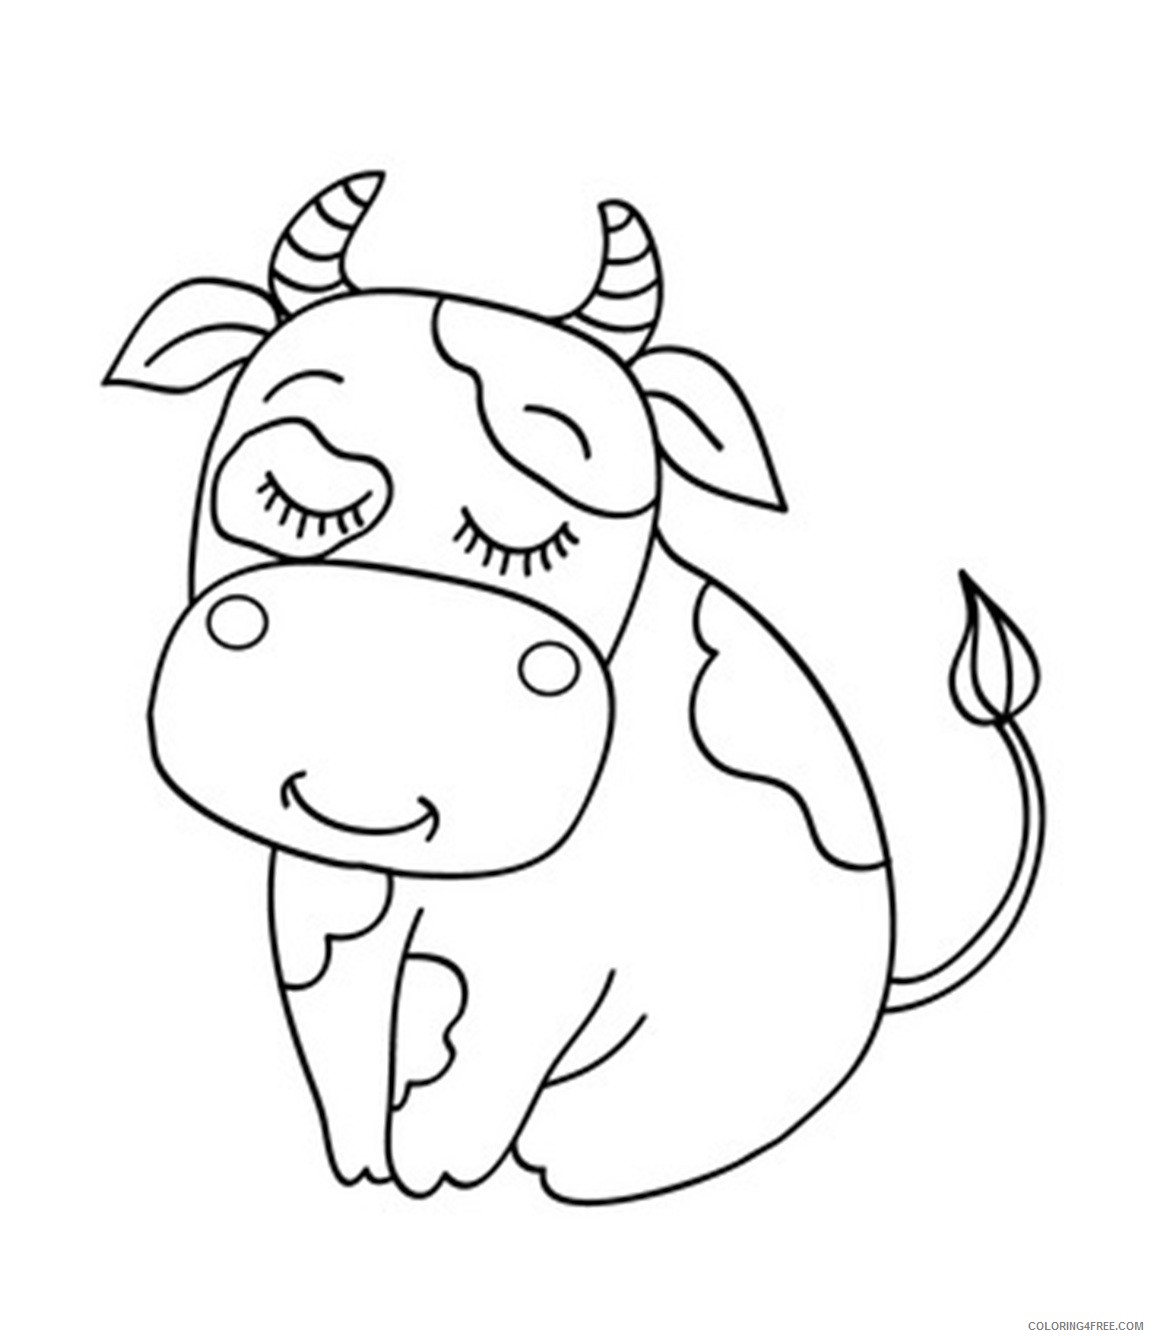 Cute Cow Coloring Pages To Print Coloring4free Coloring4free Com